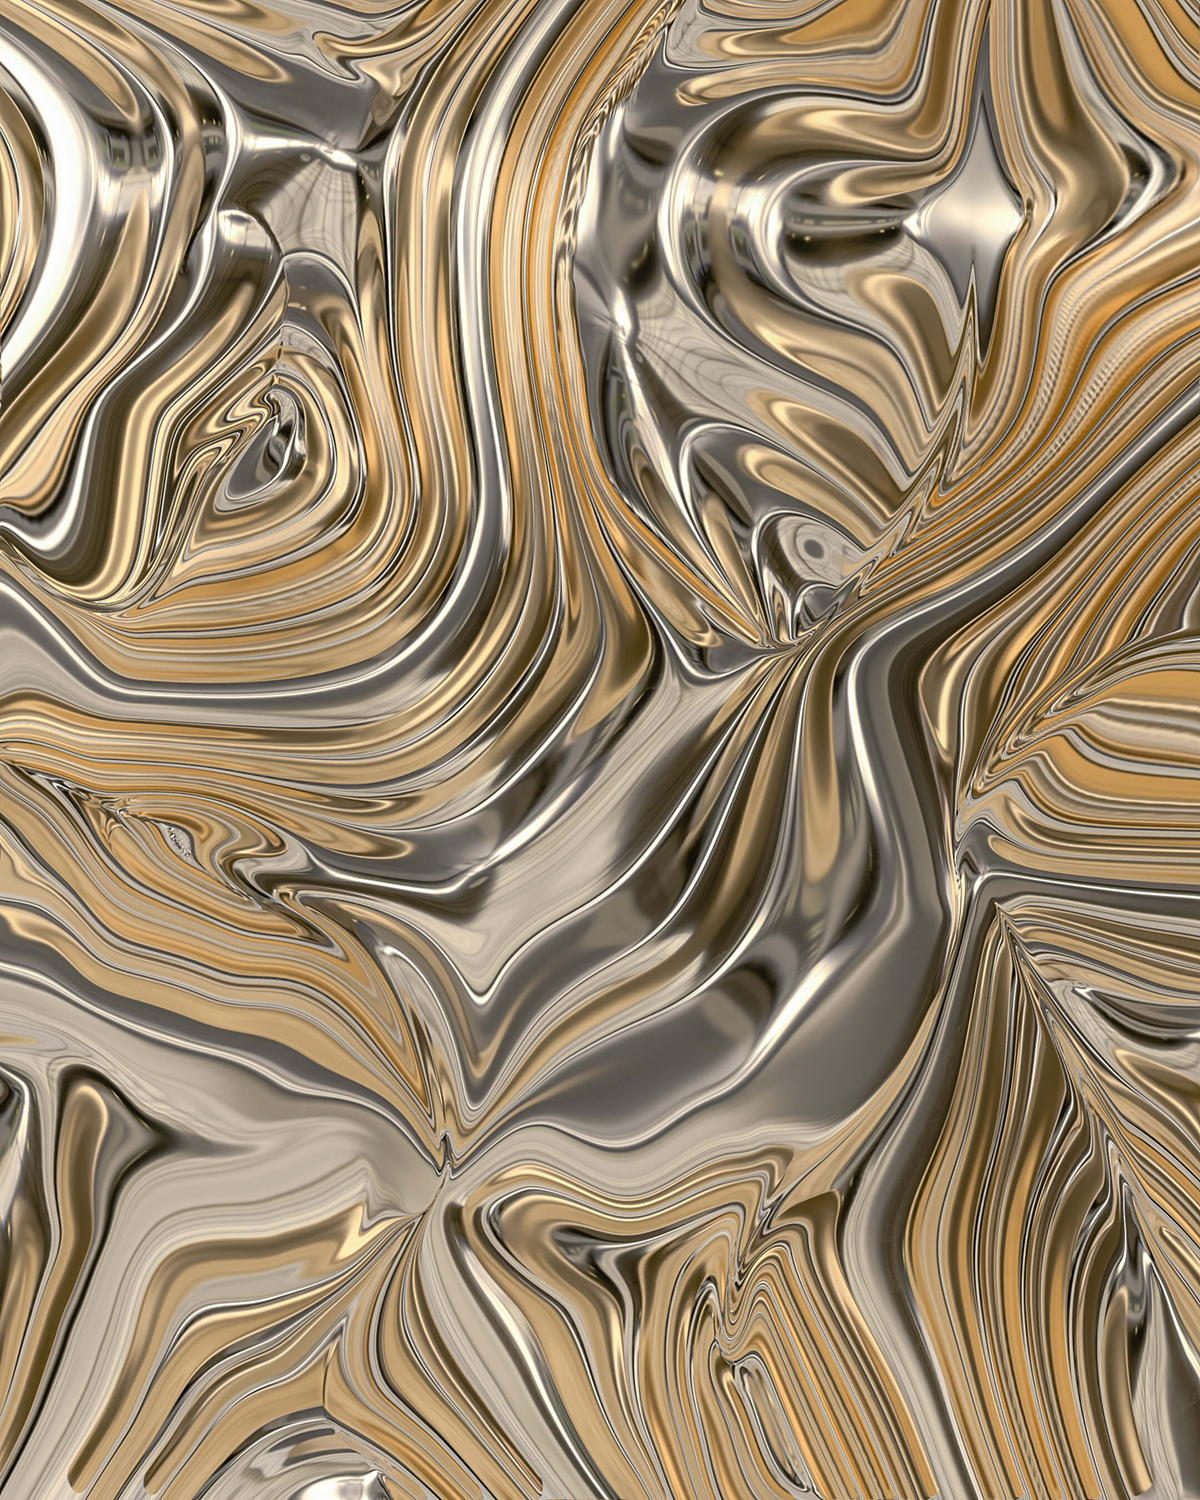 High-resolution image of a digital artwork resembling swirling liquid gold with contrasting shades, creating a marbled effect with intricate lines and curves reflecting light.